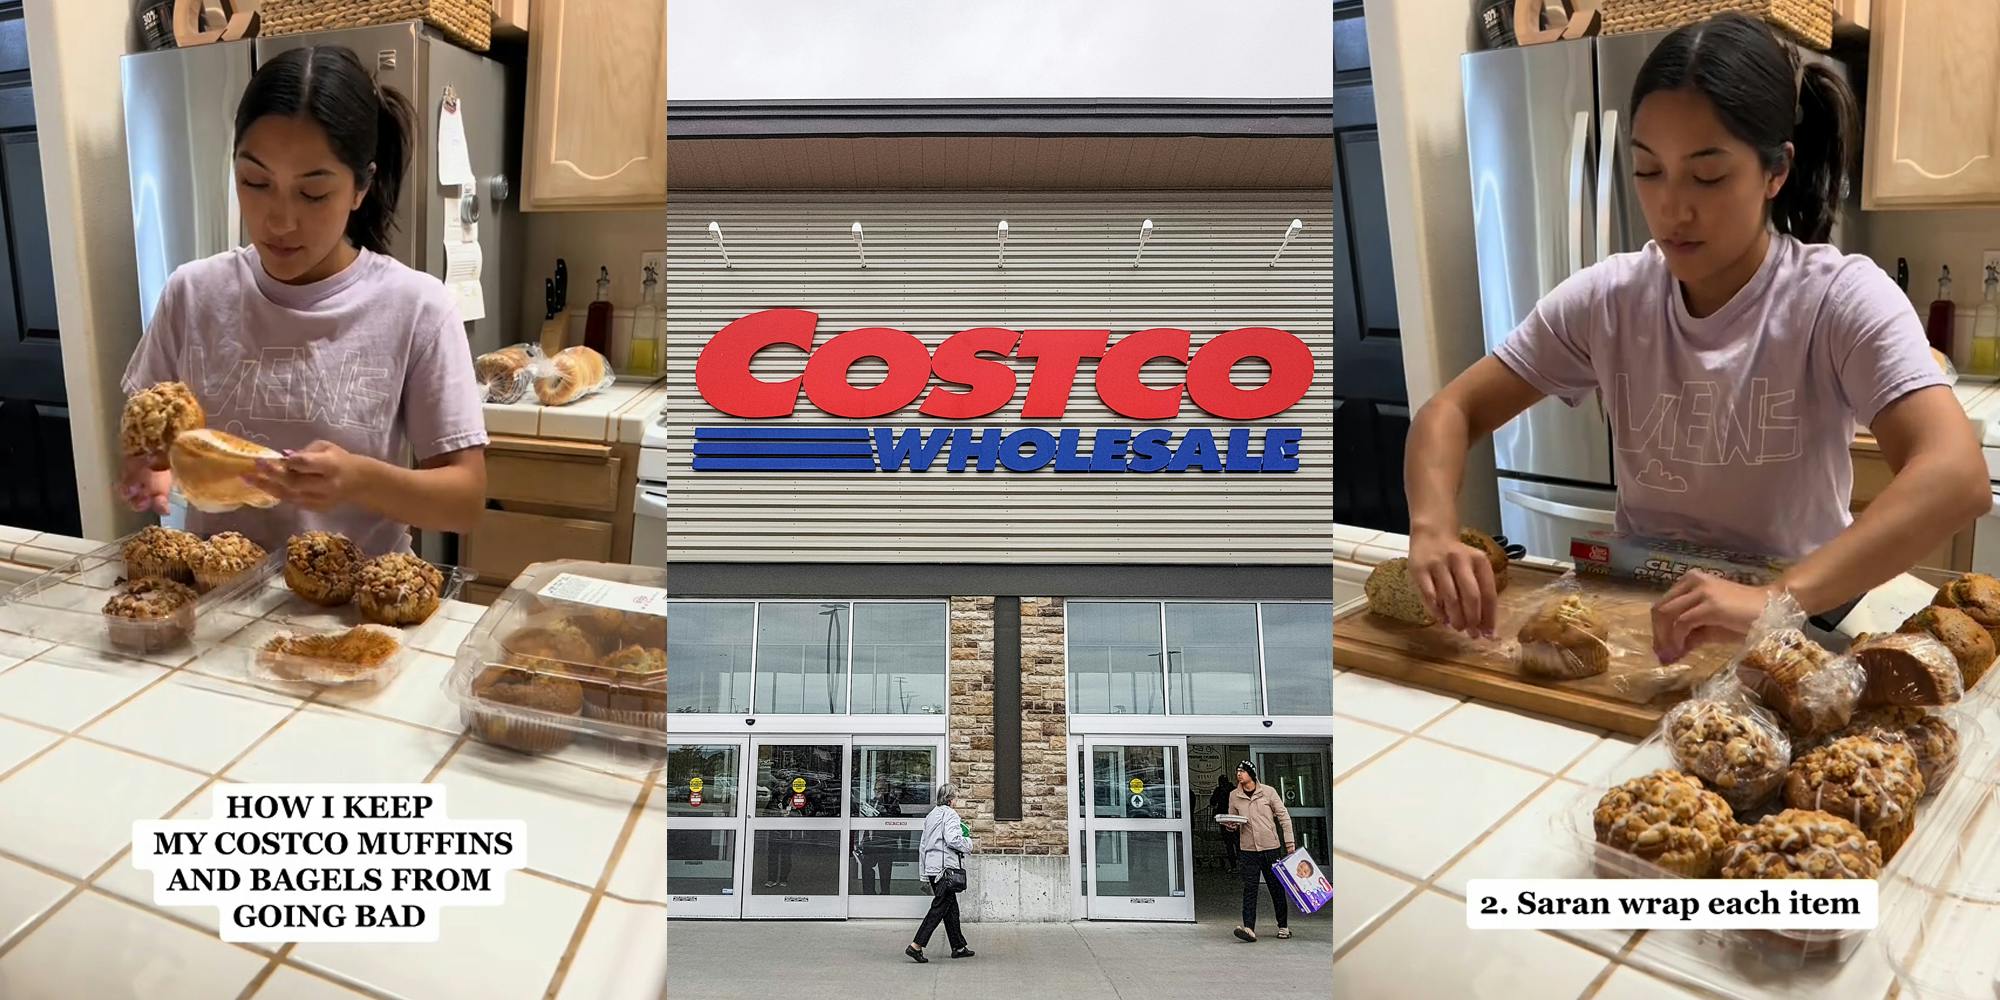 Costco customer with muffins on counter with caption "HOW I KEEP MY COSTCO MUFFINS AND BAGELS FROM GOING BAD" (l) Costco building with sign (c) Costco customer with muffins on counter with caption "2. Saran wrap each item" (r)